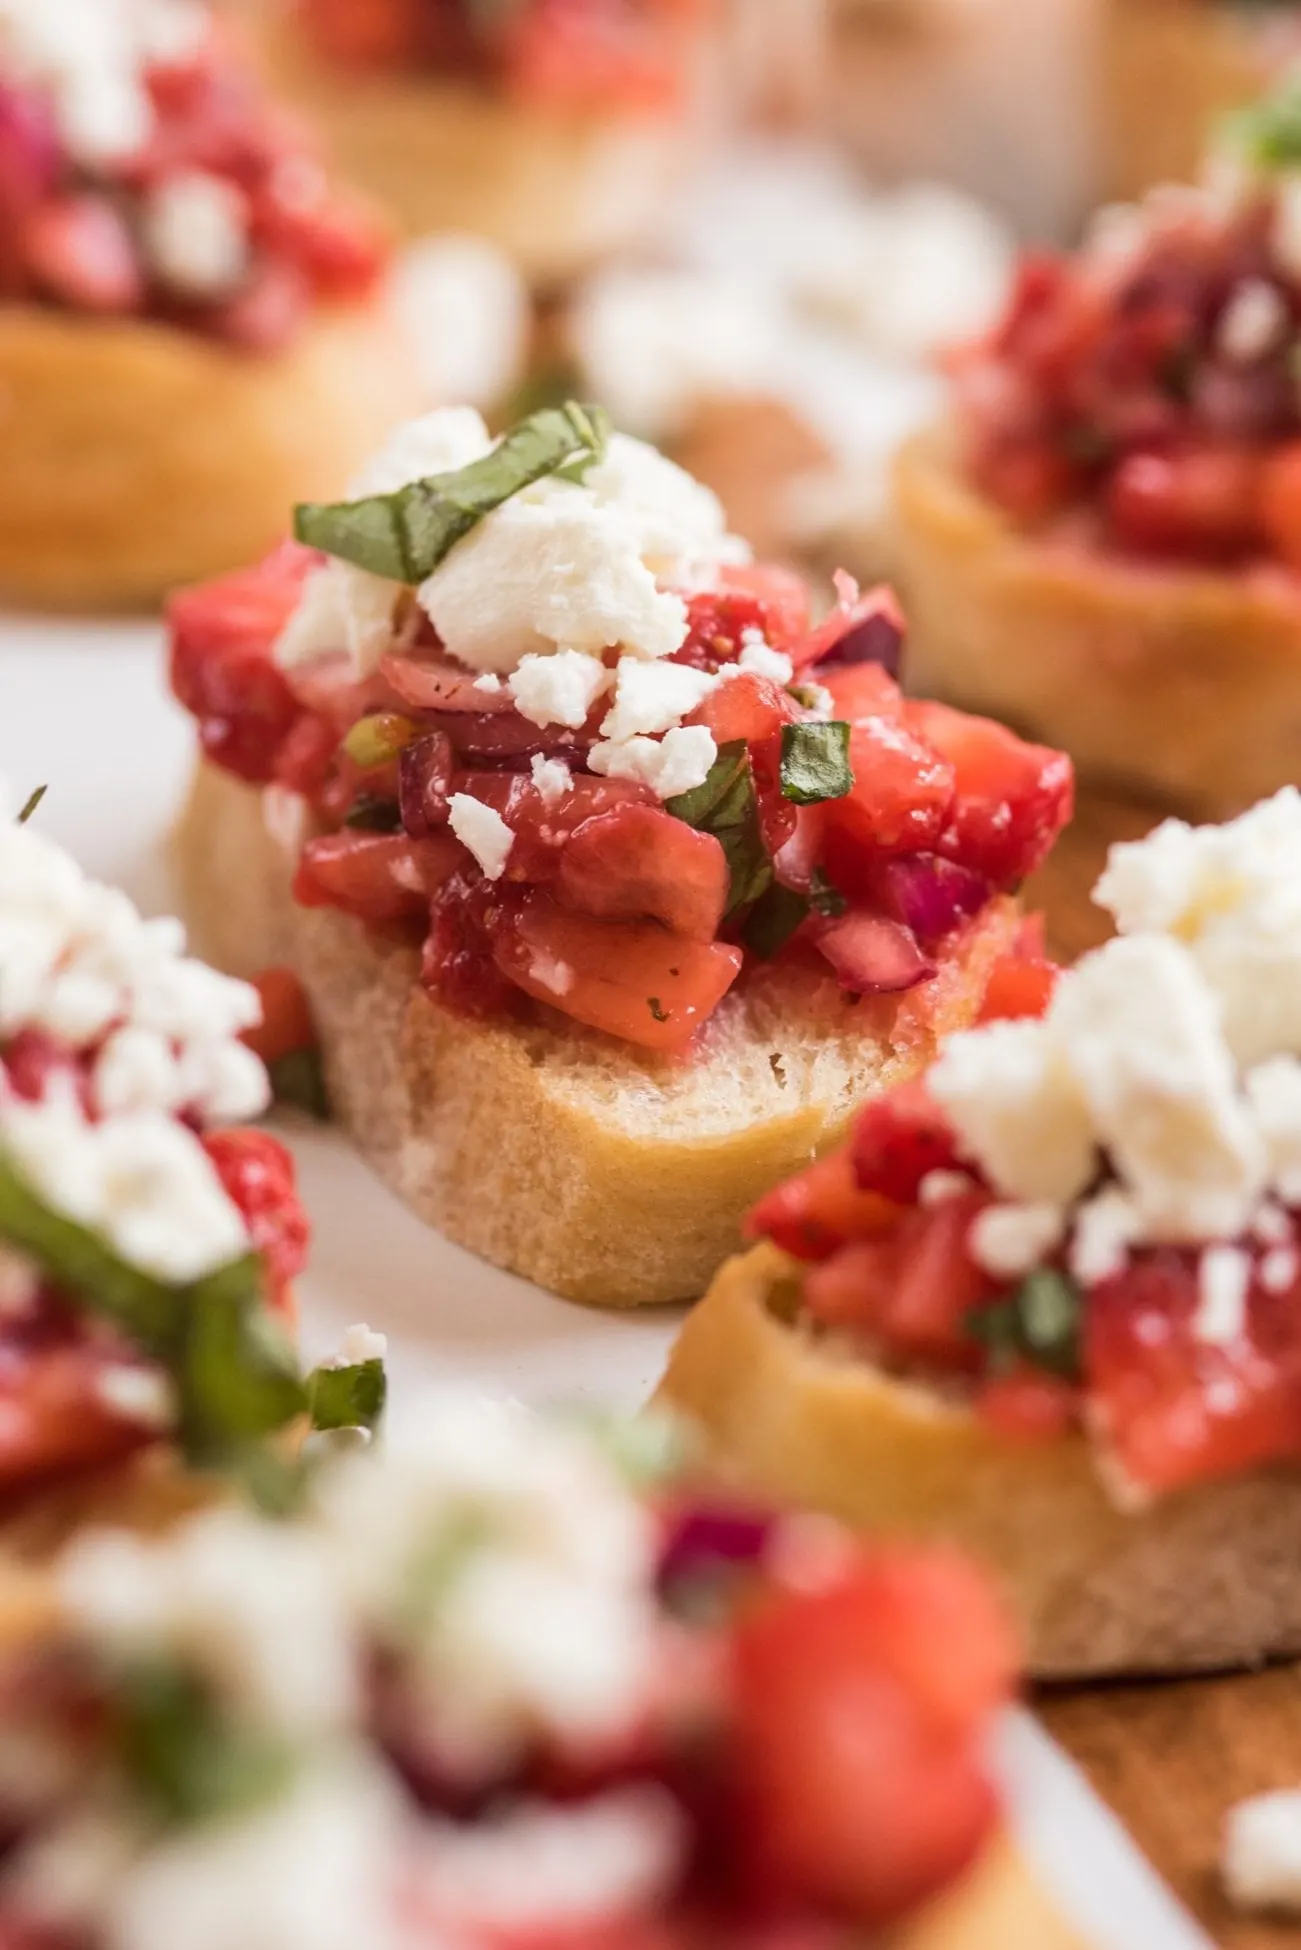 Strawberry Feta Bruschetta | 4th of July party ideas, 4th of July desserts and more from @cydconverse